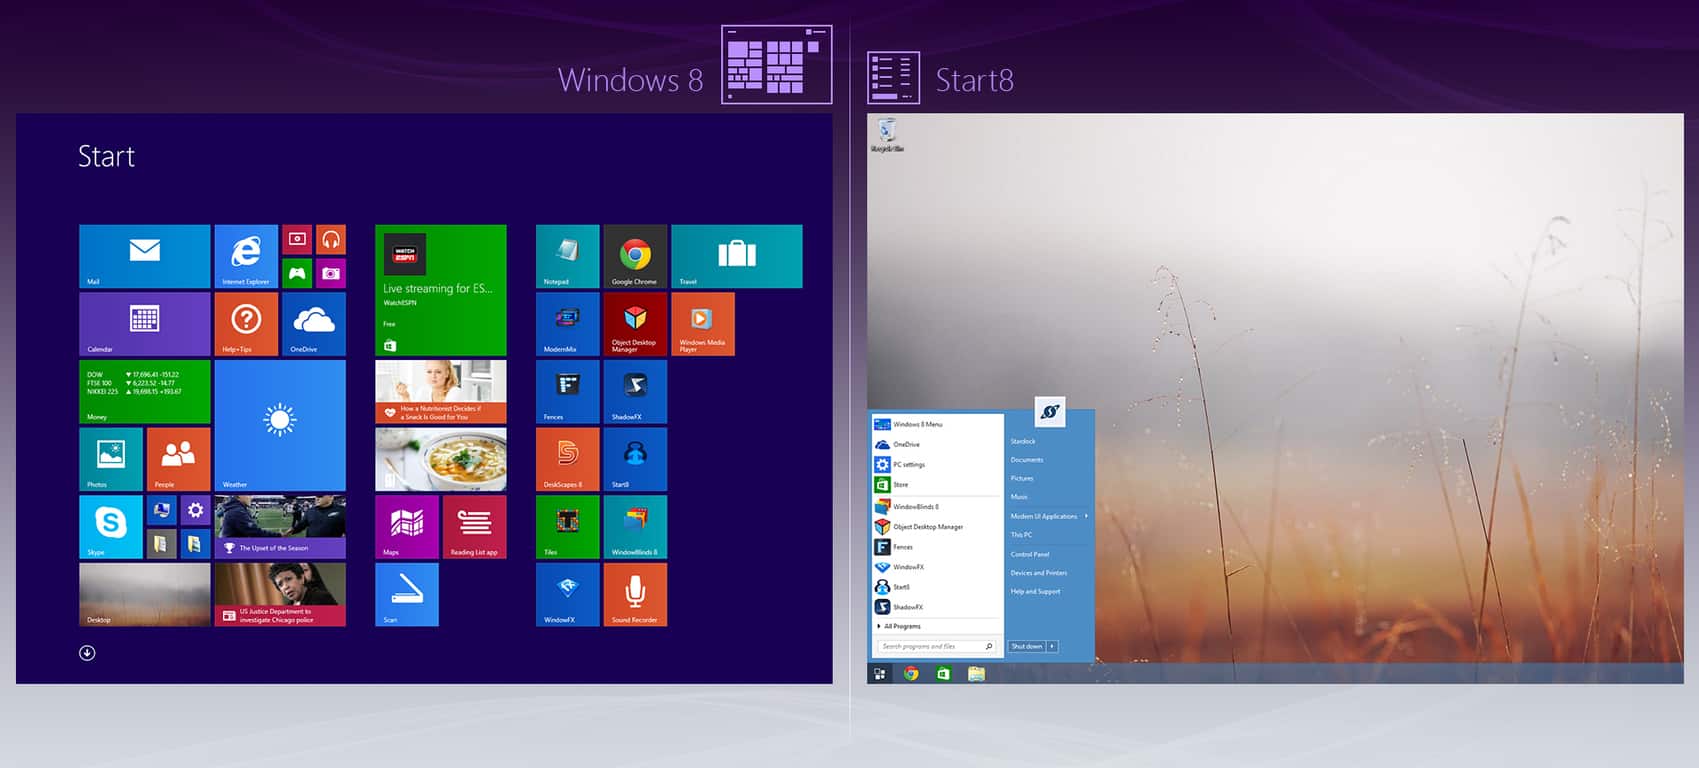 Windows 10 'Sets' functionality is already here with Stardock's Groupy - OnMSFT.com - September 27, 2018